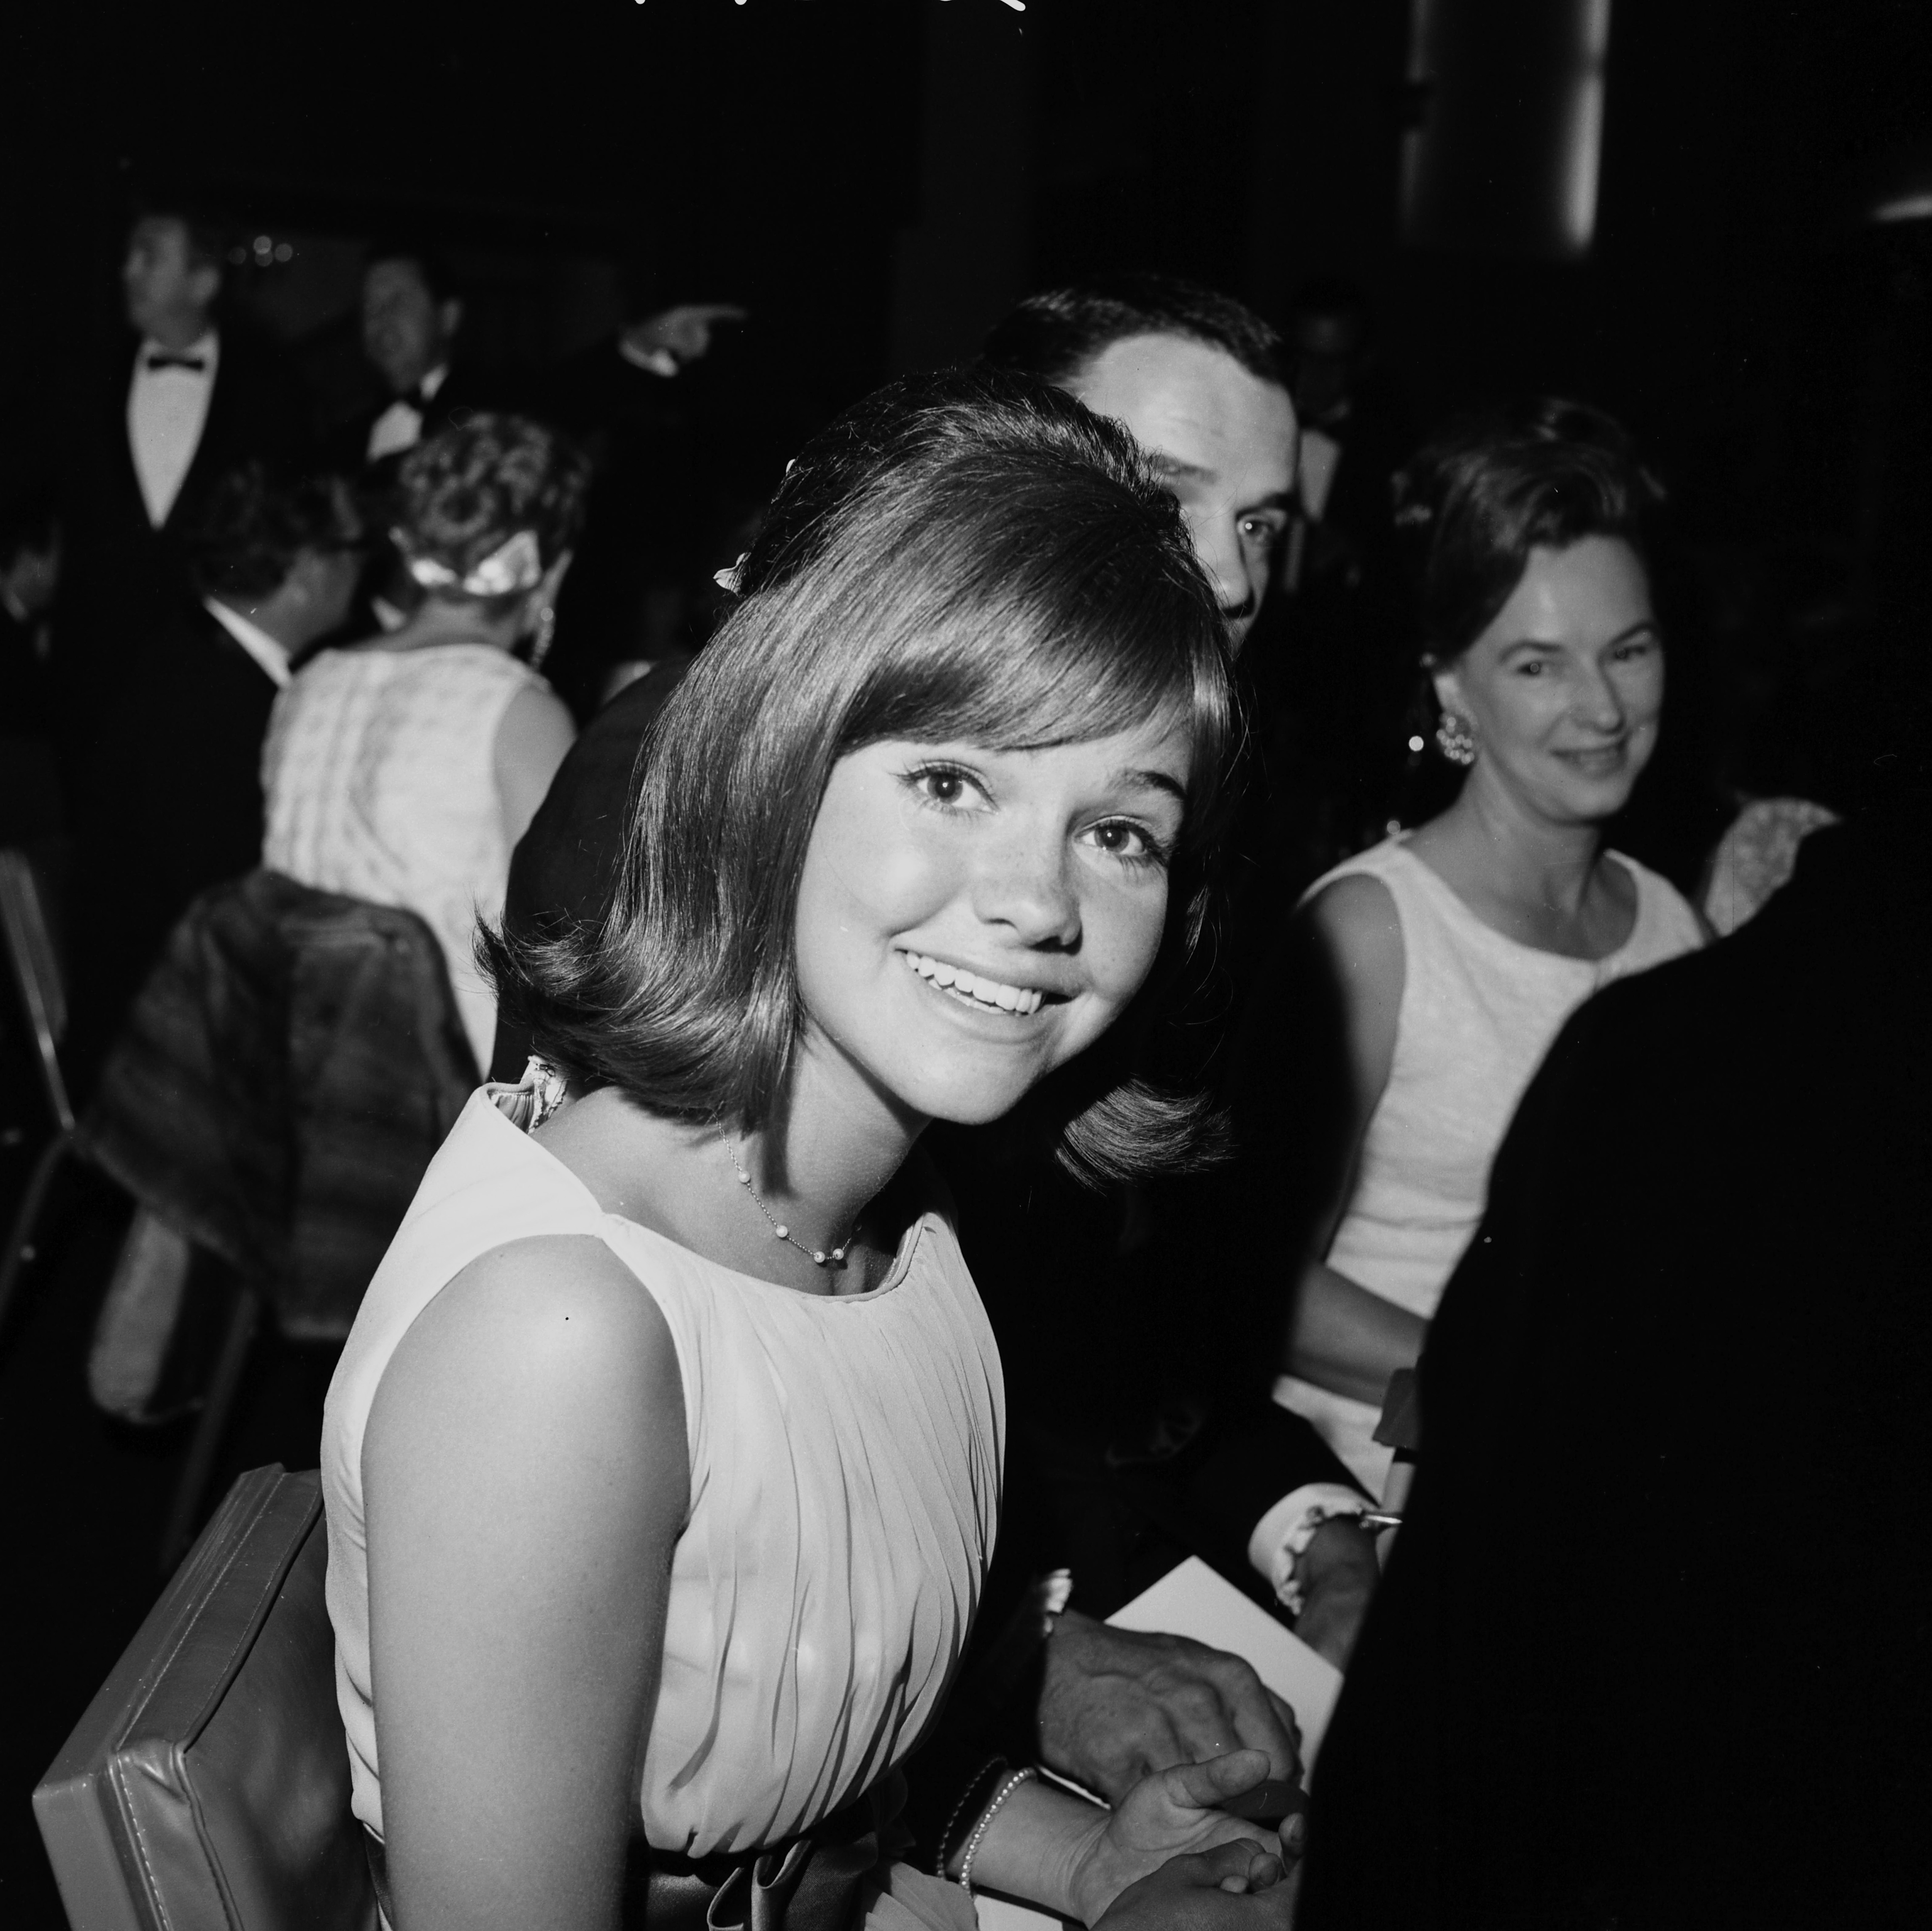 Sally Field attends a party, circa 1958 | Source: Getty Images